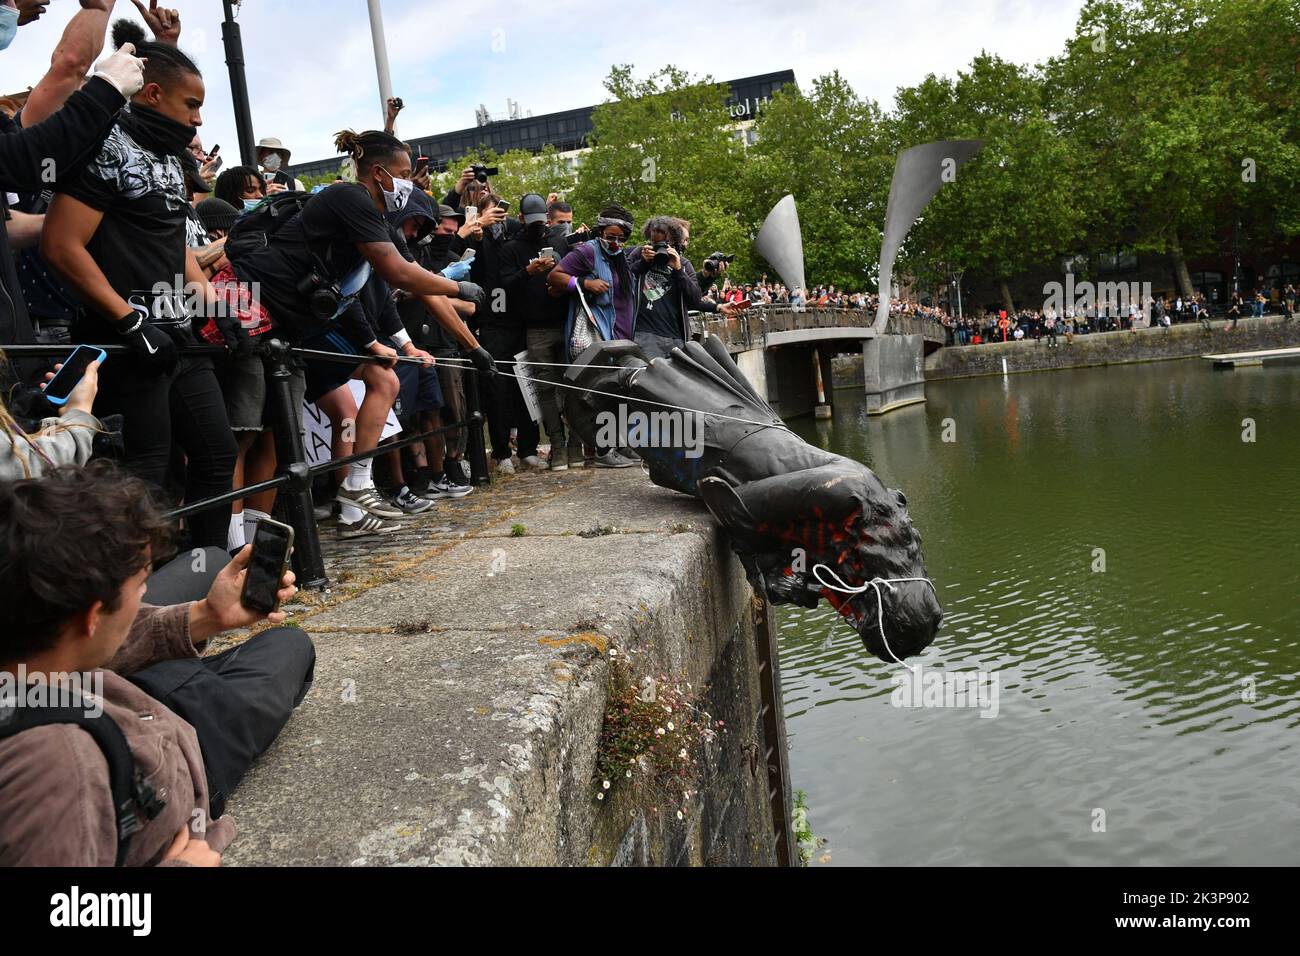 File photo dated 7/6/2020 of protesters throwing the statue of Edward Colston into Bristol harbour during a Black Lives Matter protest rally, as a ruling on legal issues arising out of the acquittal of four people who were prosecuted for pulling down a statue of slave trader Edward Colston during a Black Lives Matter protest - the so-called Colston Four - will be delivered by judges. Stock Photo